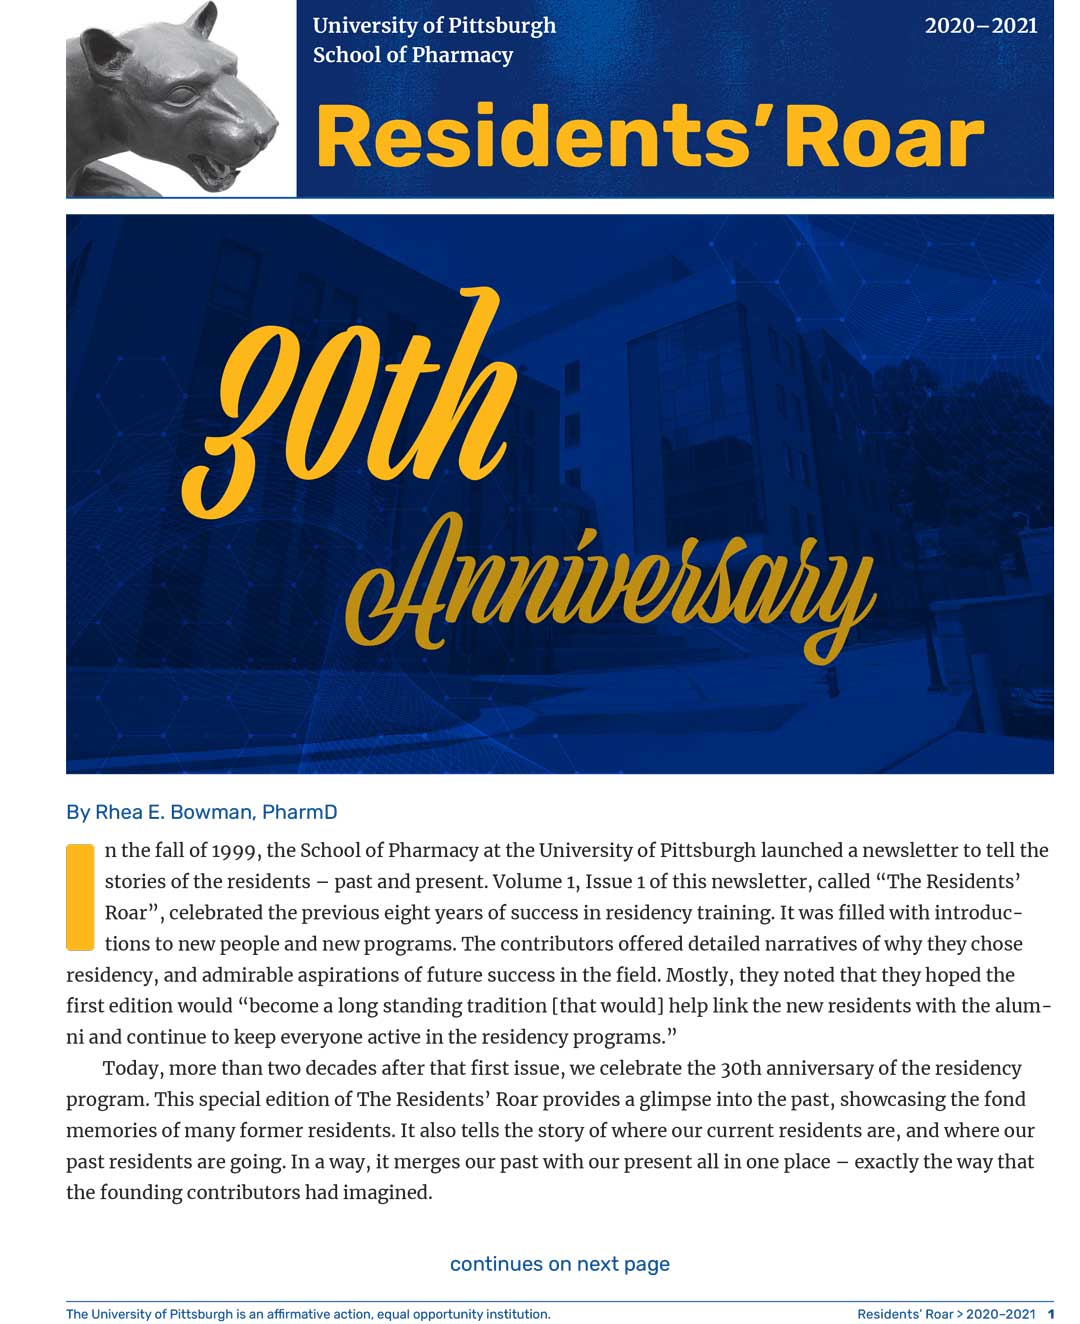 Resident's Roar 30th Anniversary Edition Title Page